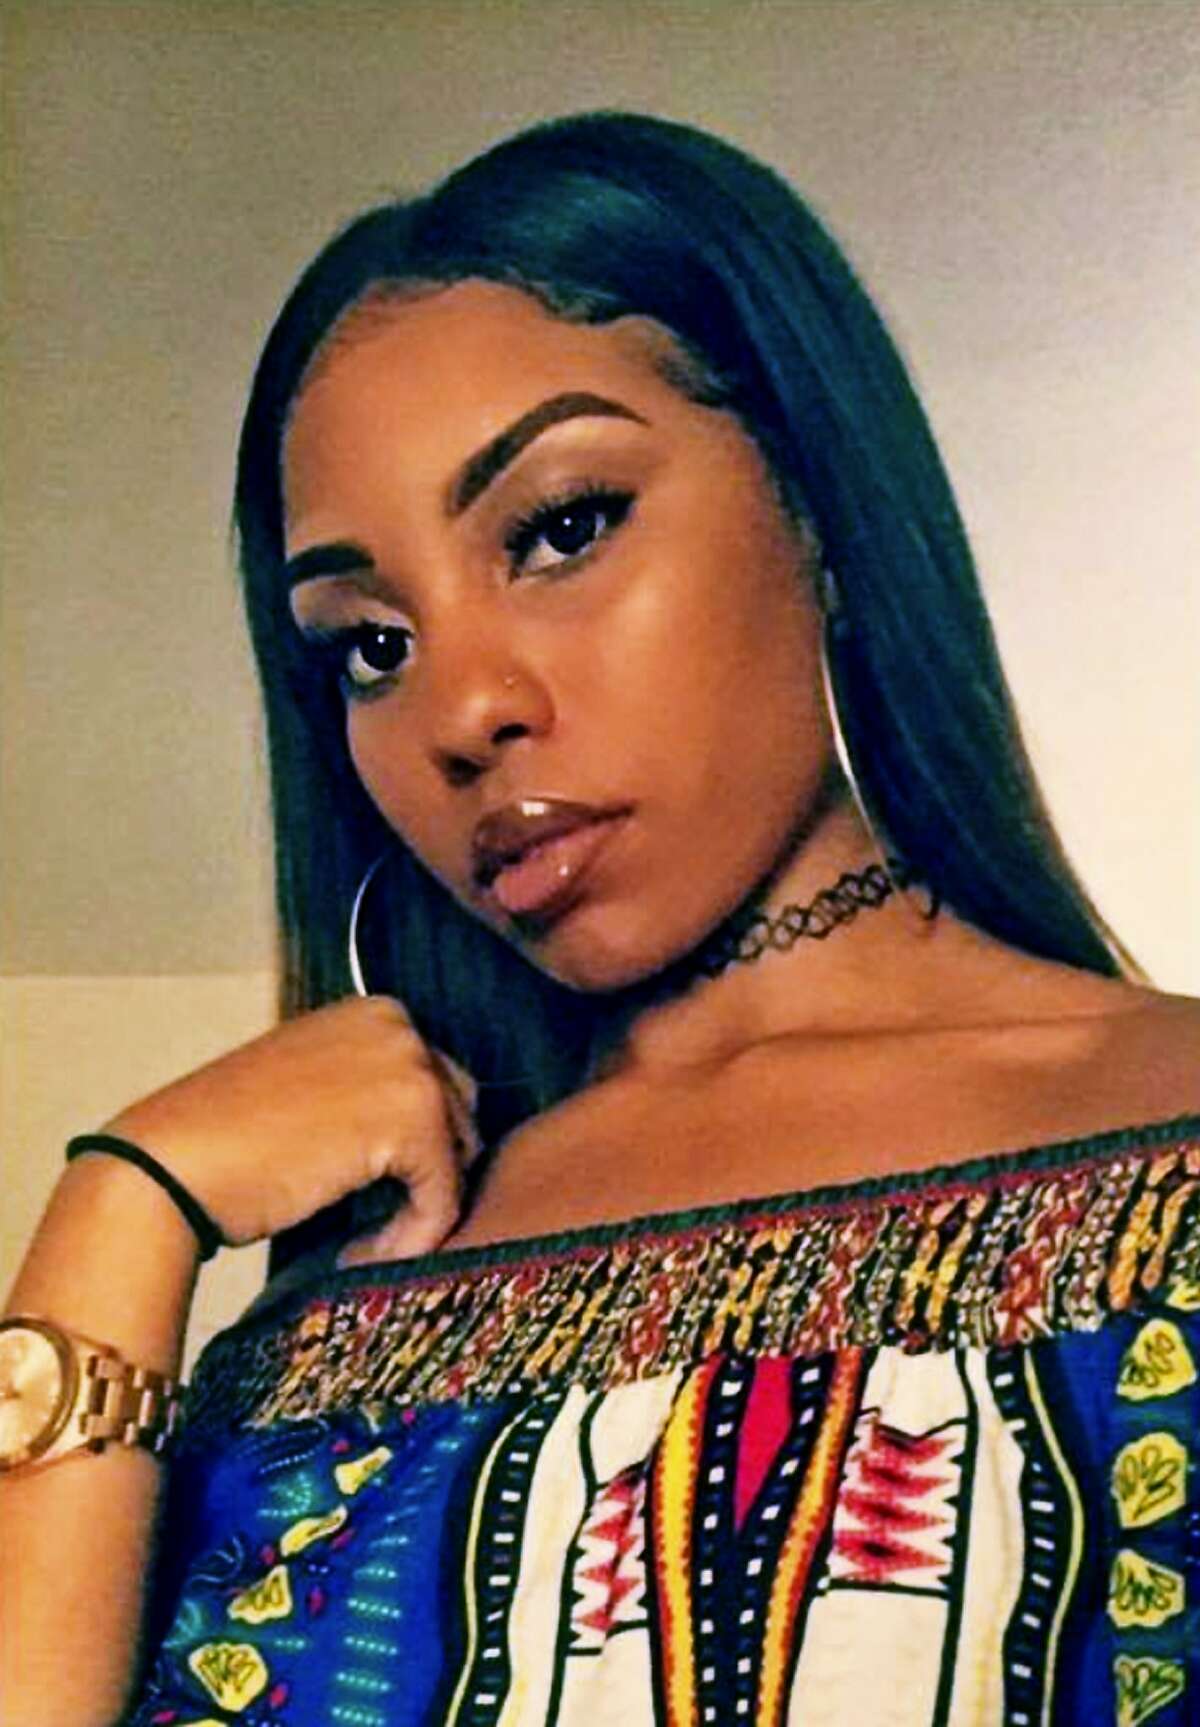 This July 3, 2017, photo provided by Ebony Monroe shows her cousin Nia Wilson in a selfie, who was killed in an unprovoked stabbing attack at a Bay Area Rapid Transit station in Oakland on Sunday, July 22, 2018. John Cowell, 27, a recently paroled robber with a violent history, was peacefully arrested on an Antioch-bound train Monday night about 12 miles (19 kilometers) from the Oakland station where investigators believe he killed Wilson and wounded her sister Sunday night. 